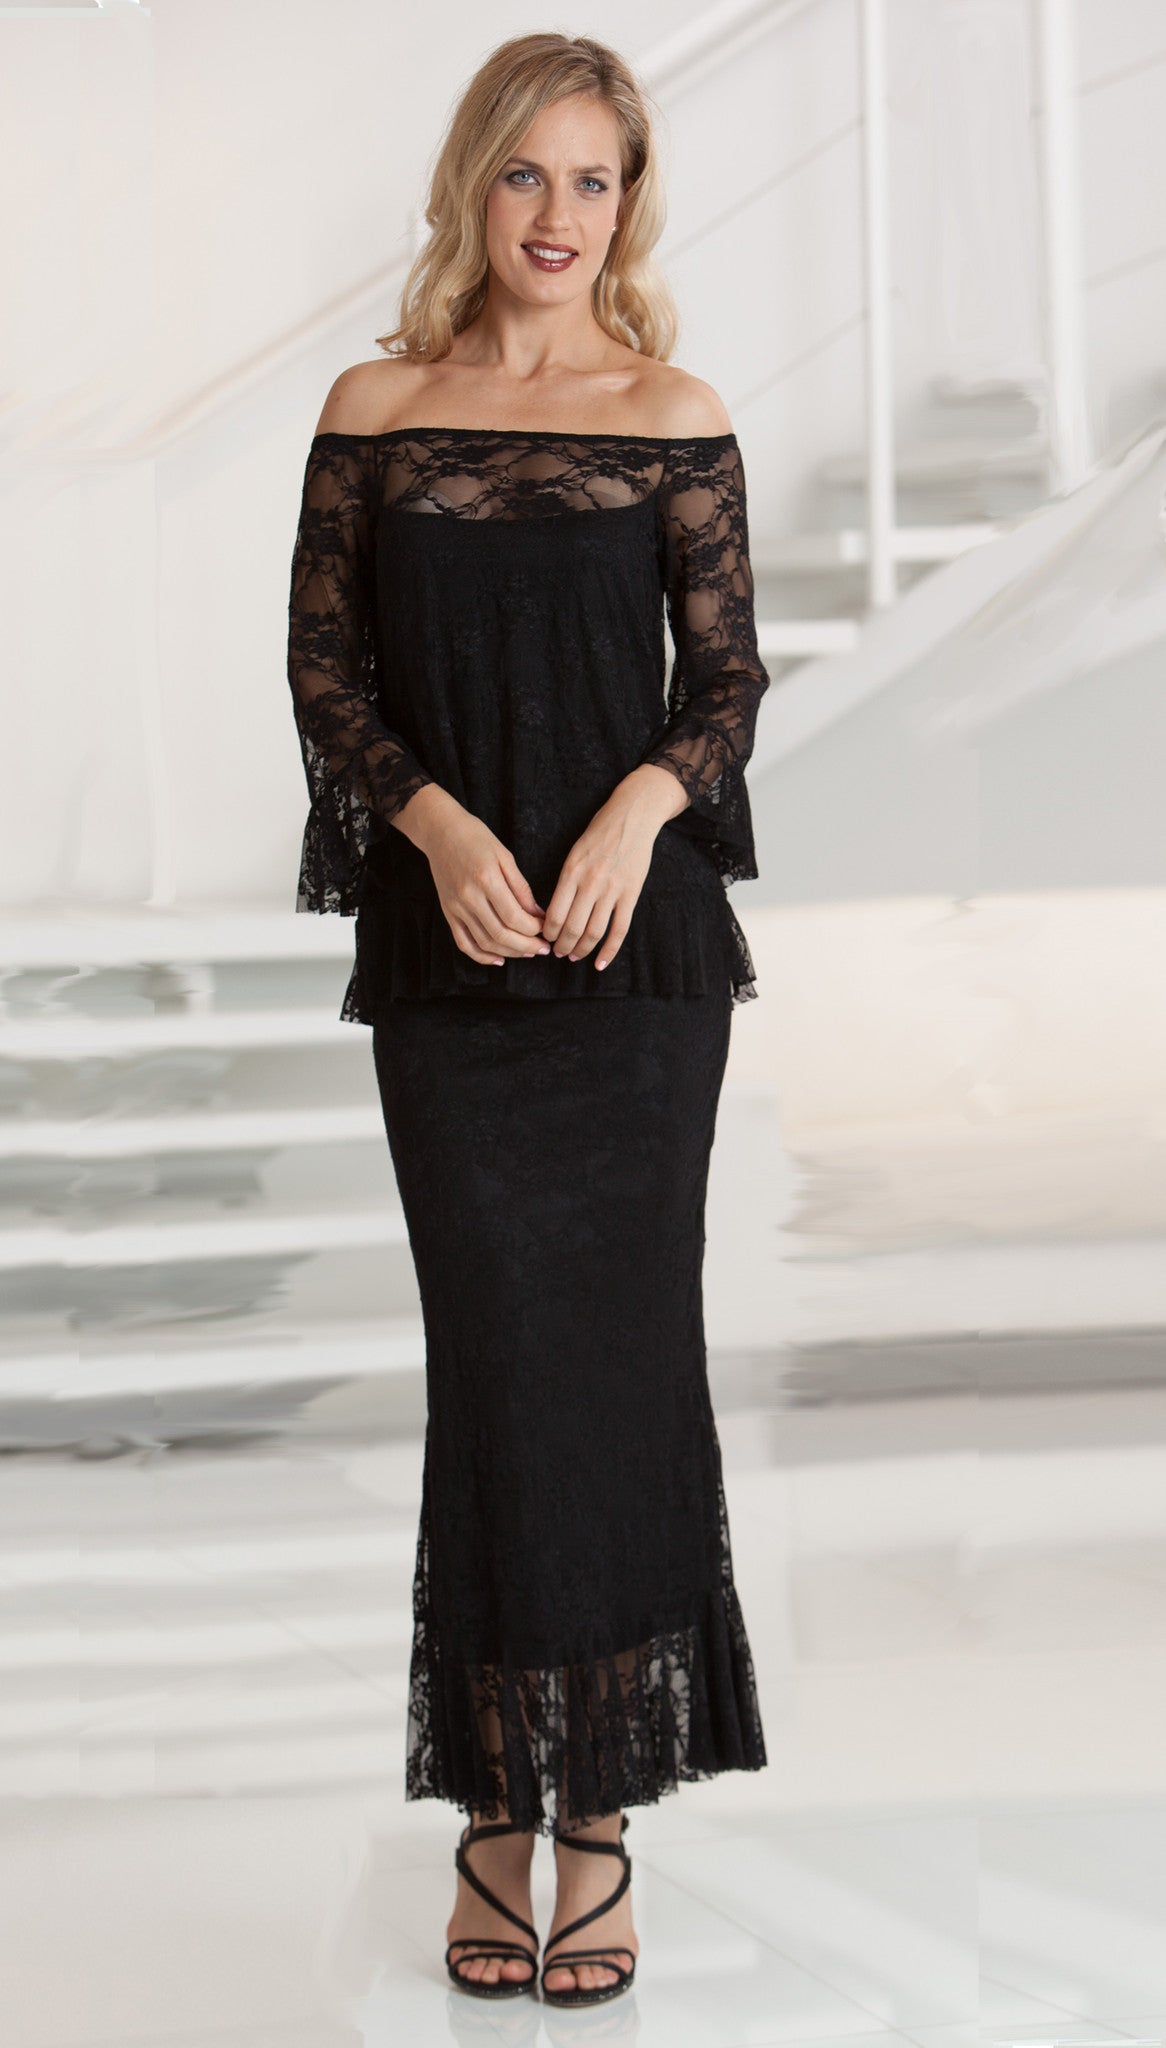 Off/On Shoulder Stretch Lace Top with Ruffle Sleeve - BSL14 / Skirt SSL4 sold separetely - Sara Mique Evening Wear